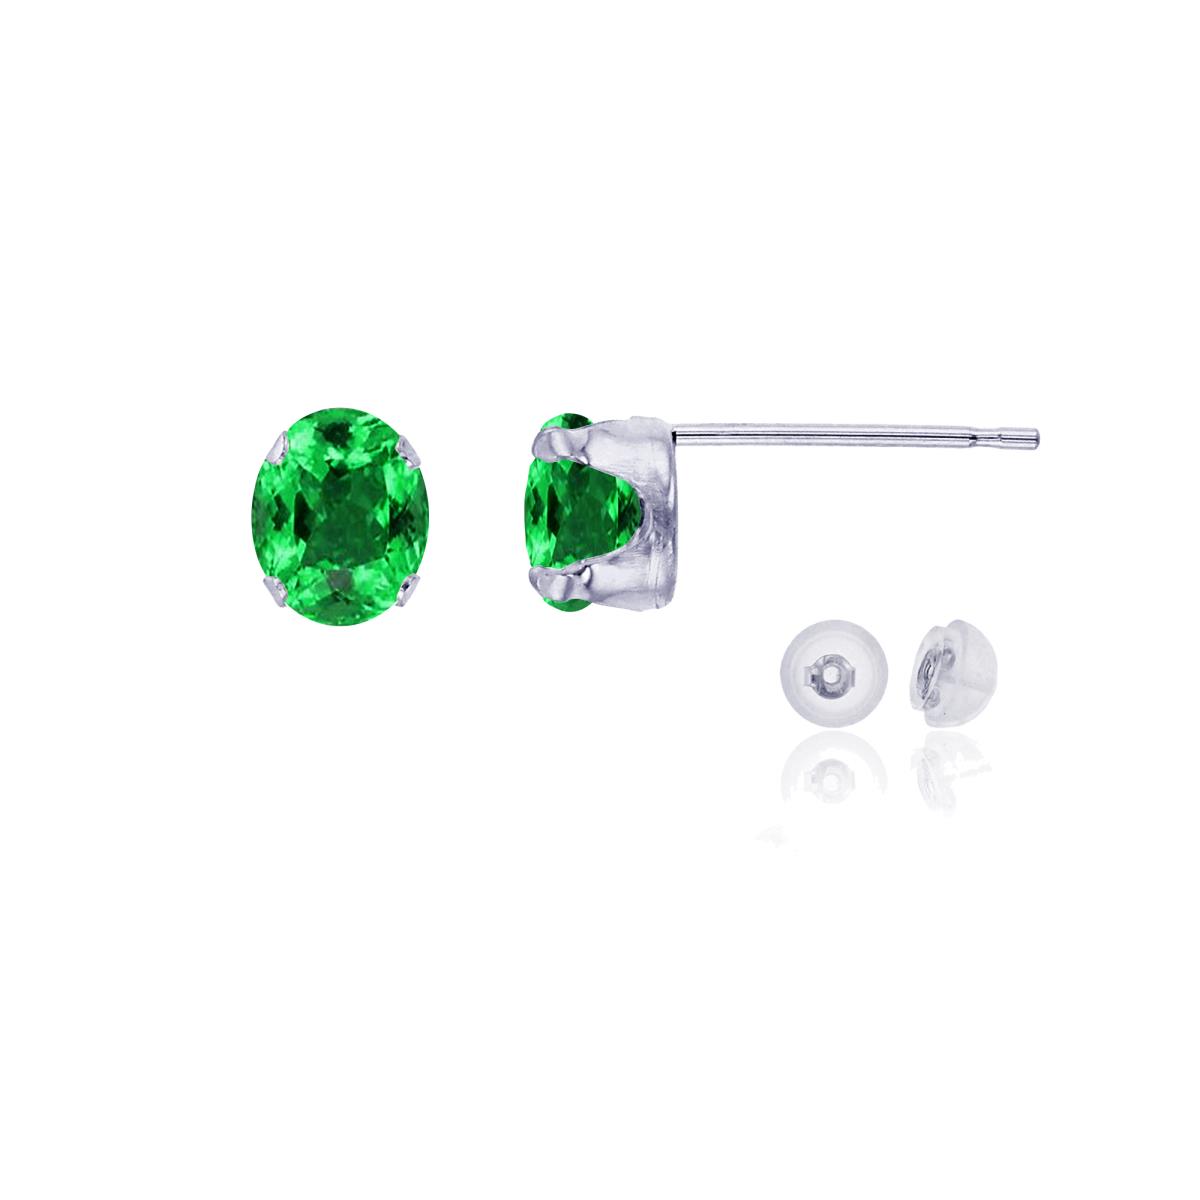 10K White Gold 6x4mm Oval Cr Emerald Stud Earring with Silicone Back